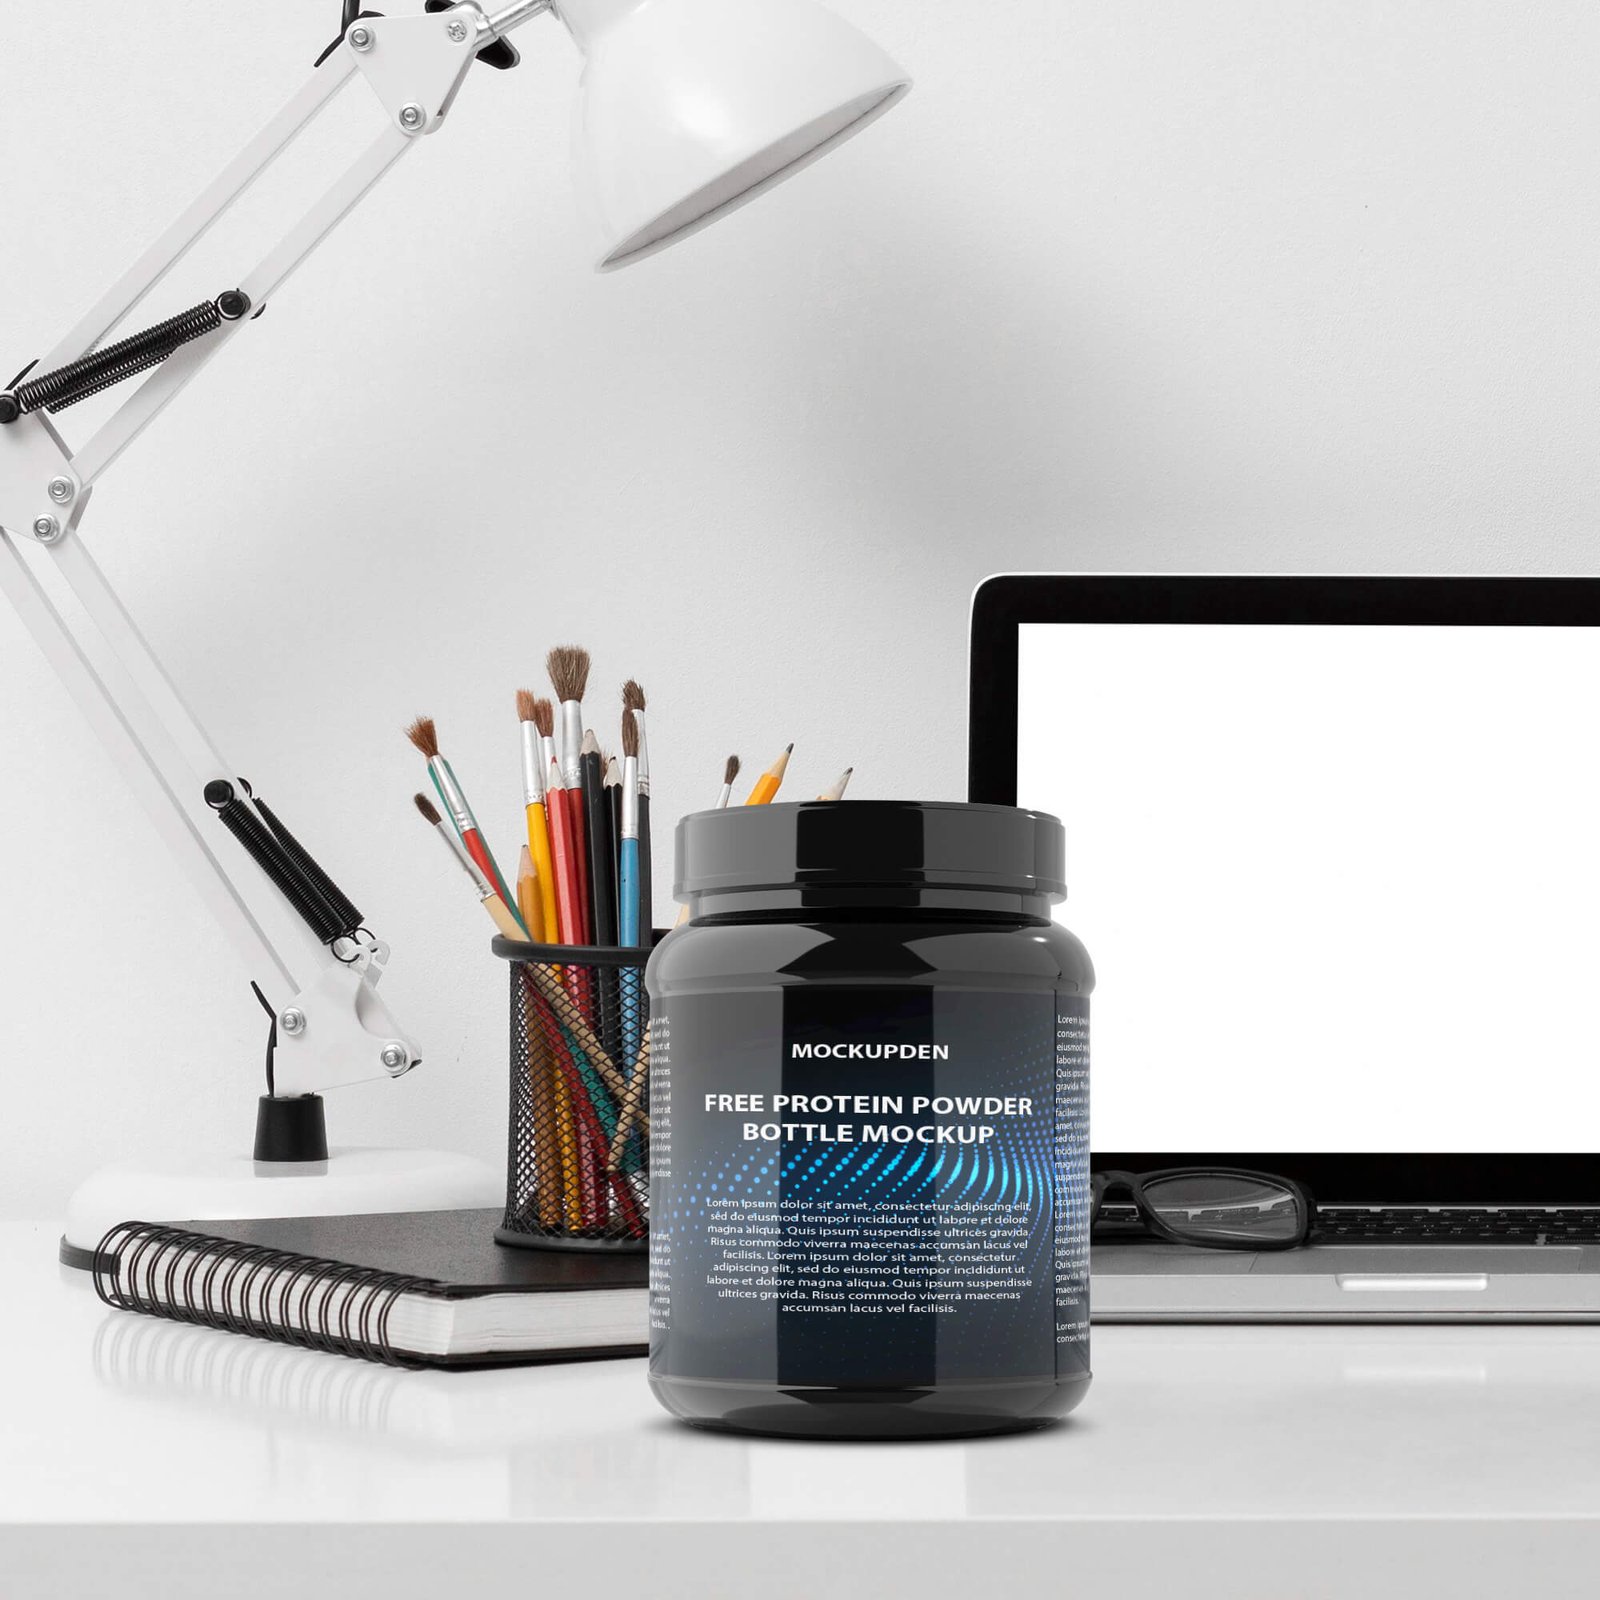 Free Protein Powder Bottle Mockup PSD Template